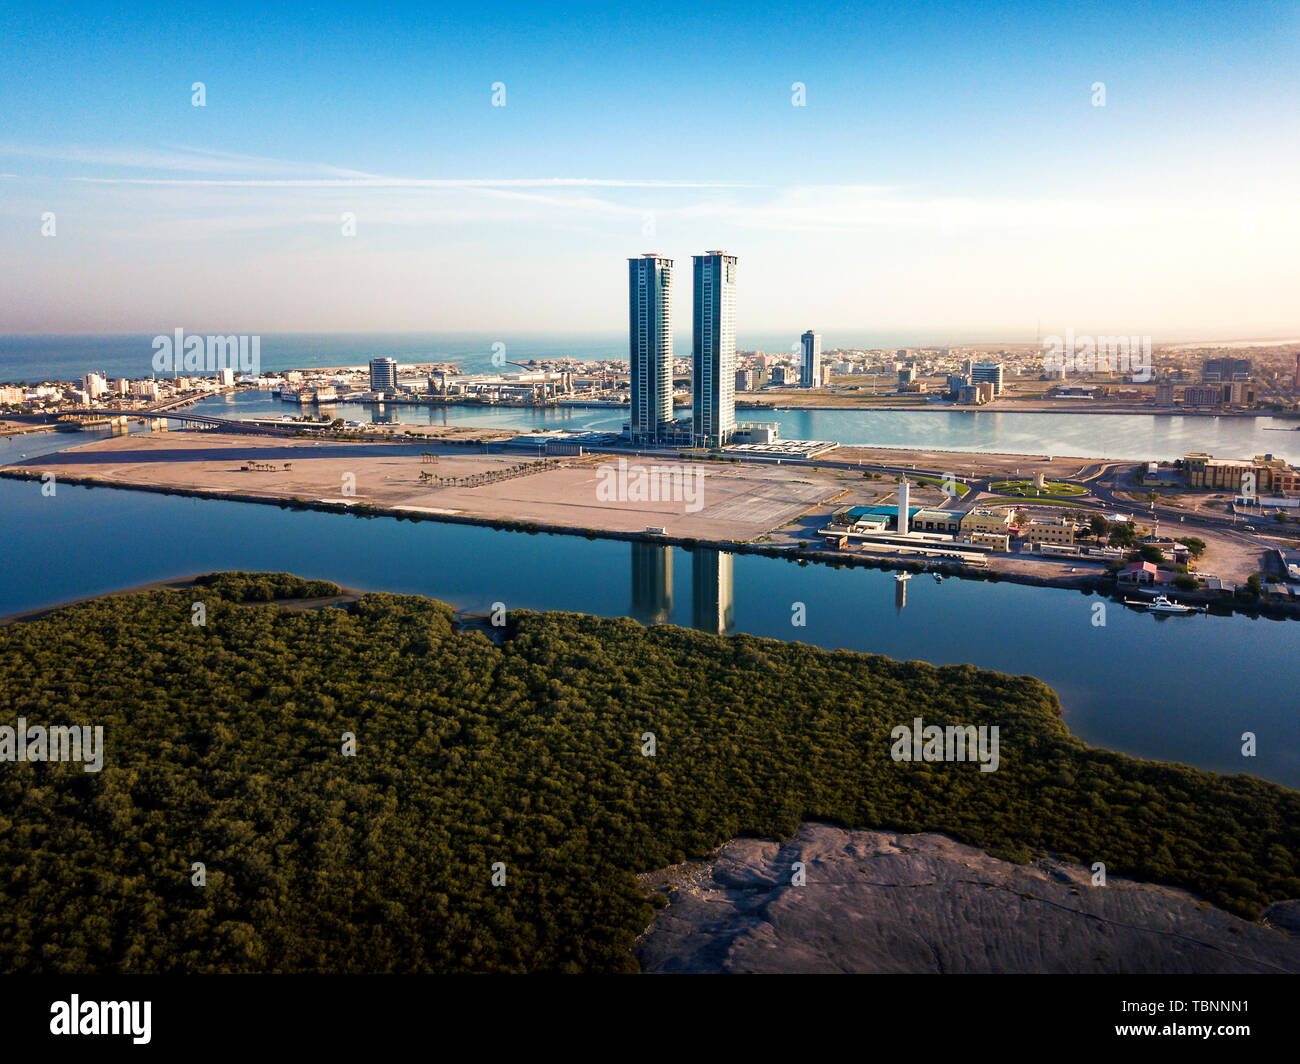 Panoramic view of Ras al Khaimah over mangrove forest in the UAE United Arab Emirates aerial Stock Photo